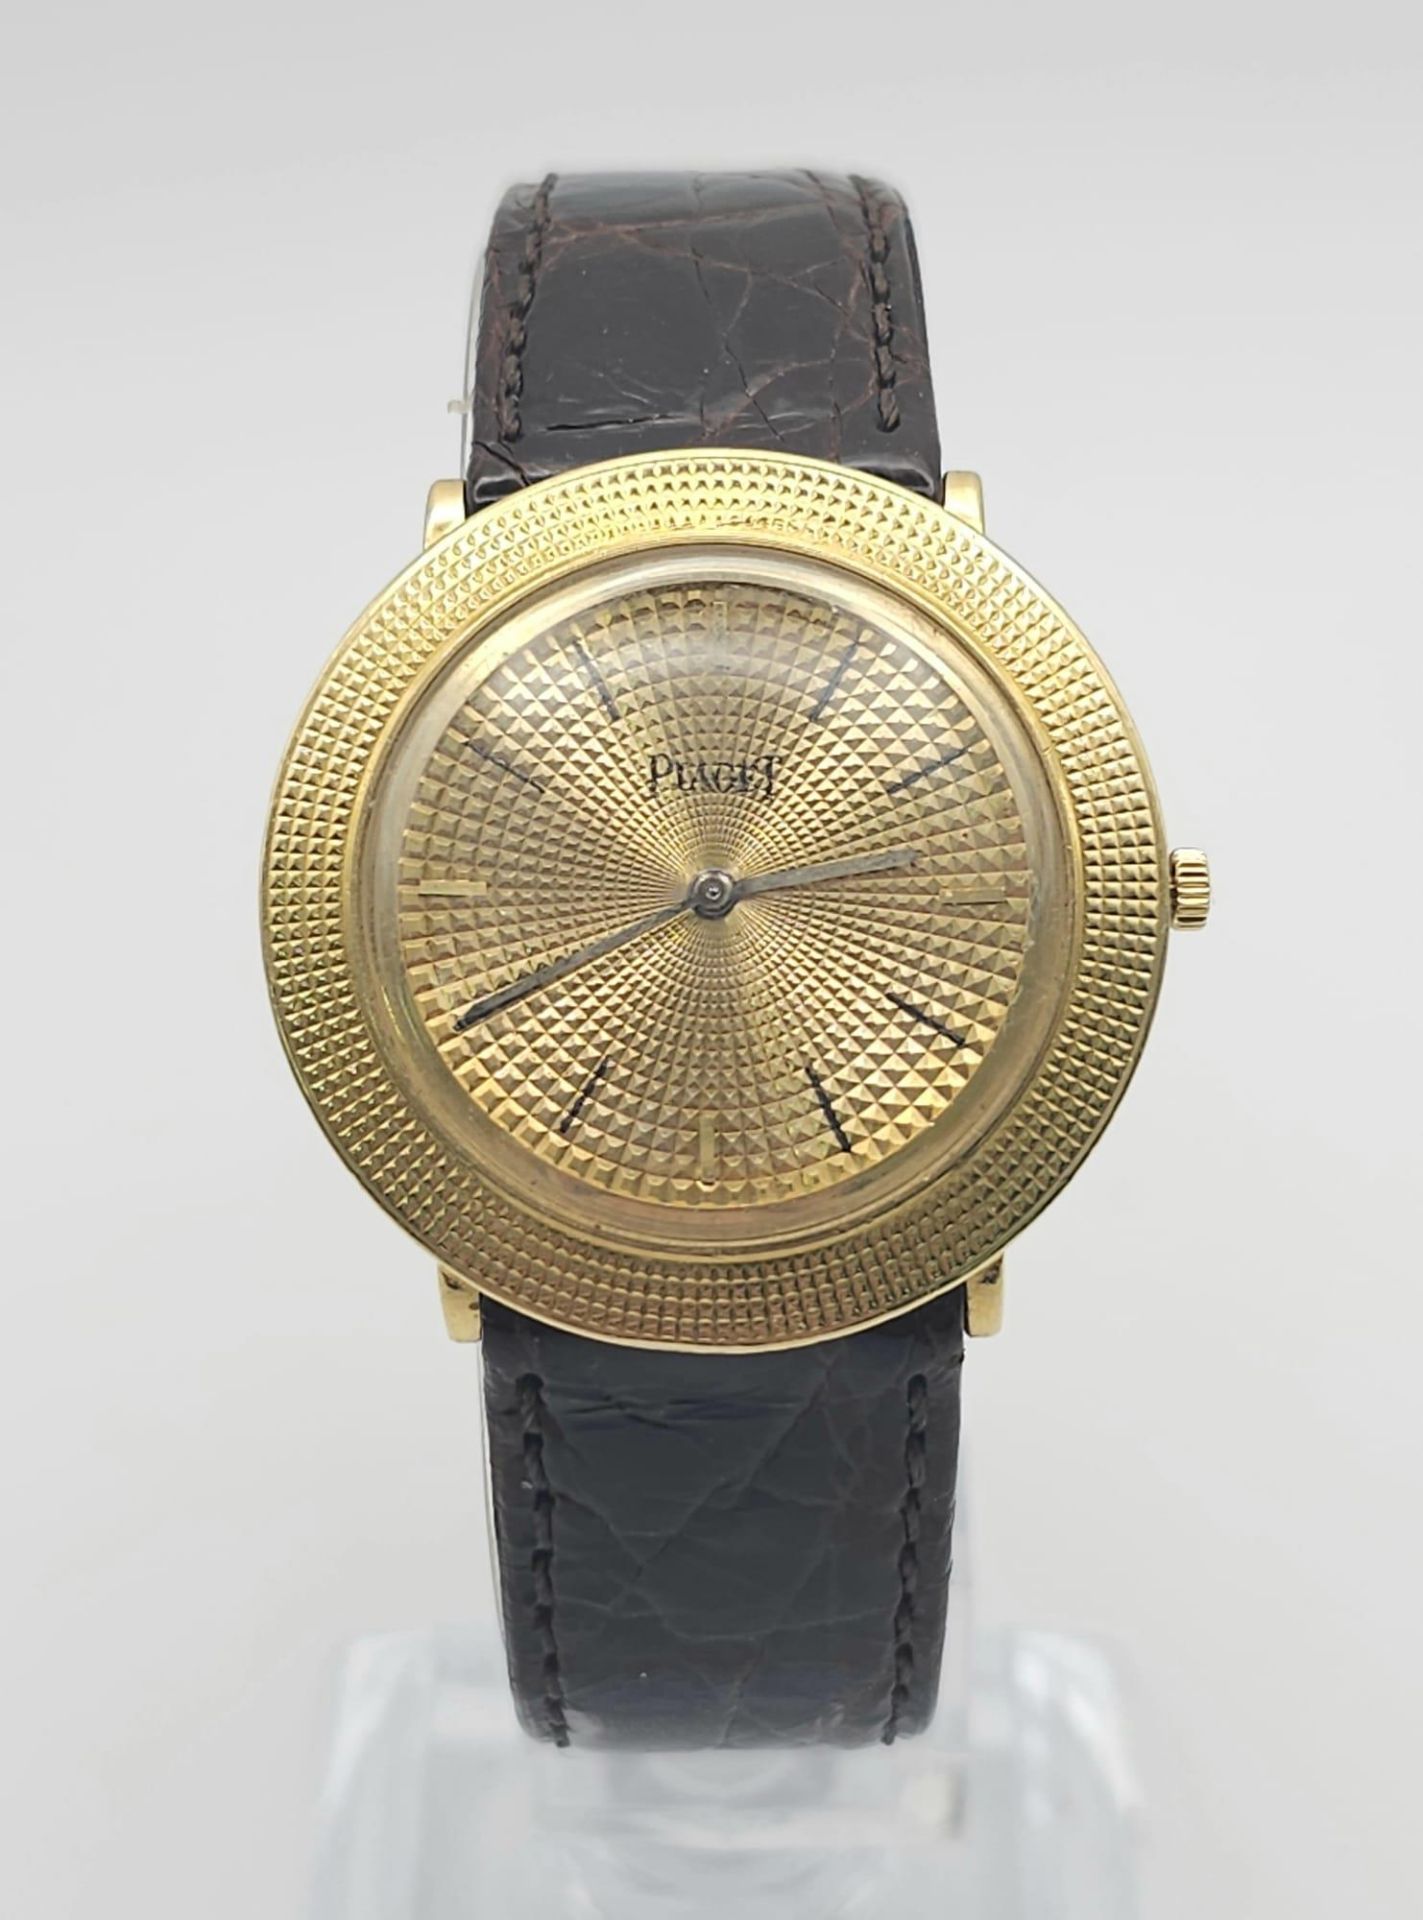 A Vintage 18K Gold Piaget Gents Watch with Hypnotic Dial. Brown crocodile strap. 18k gold case - - Image 2 of 25